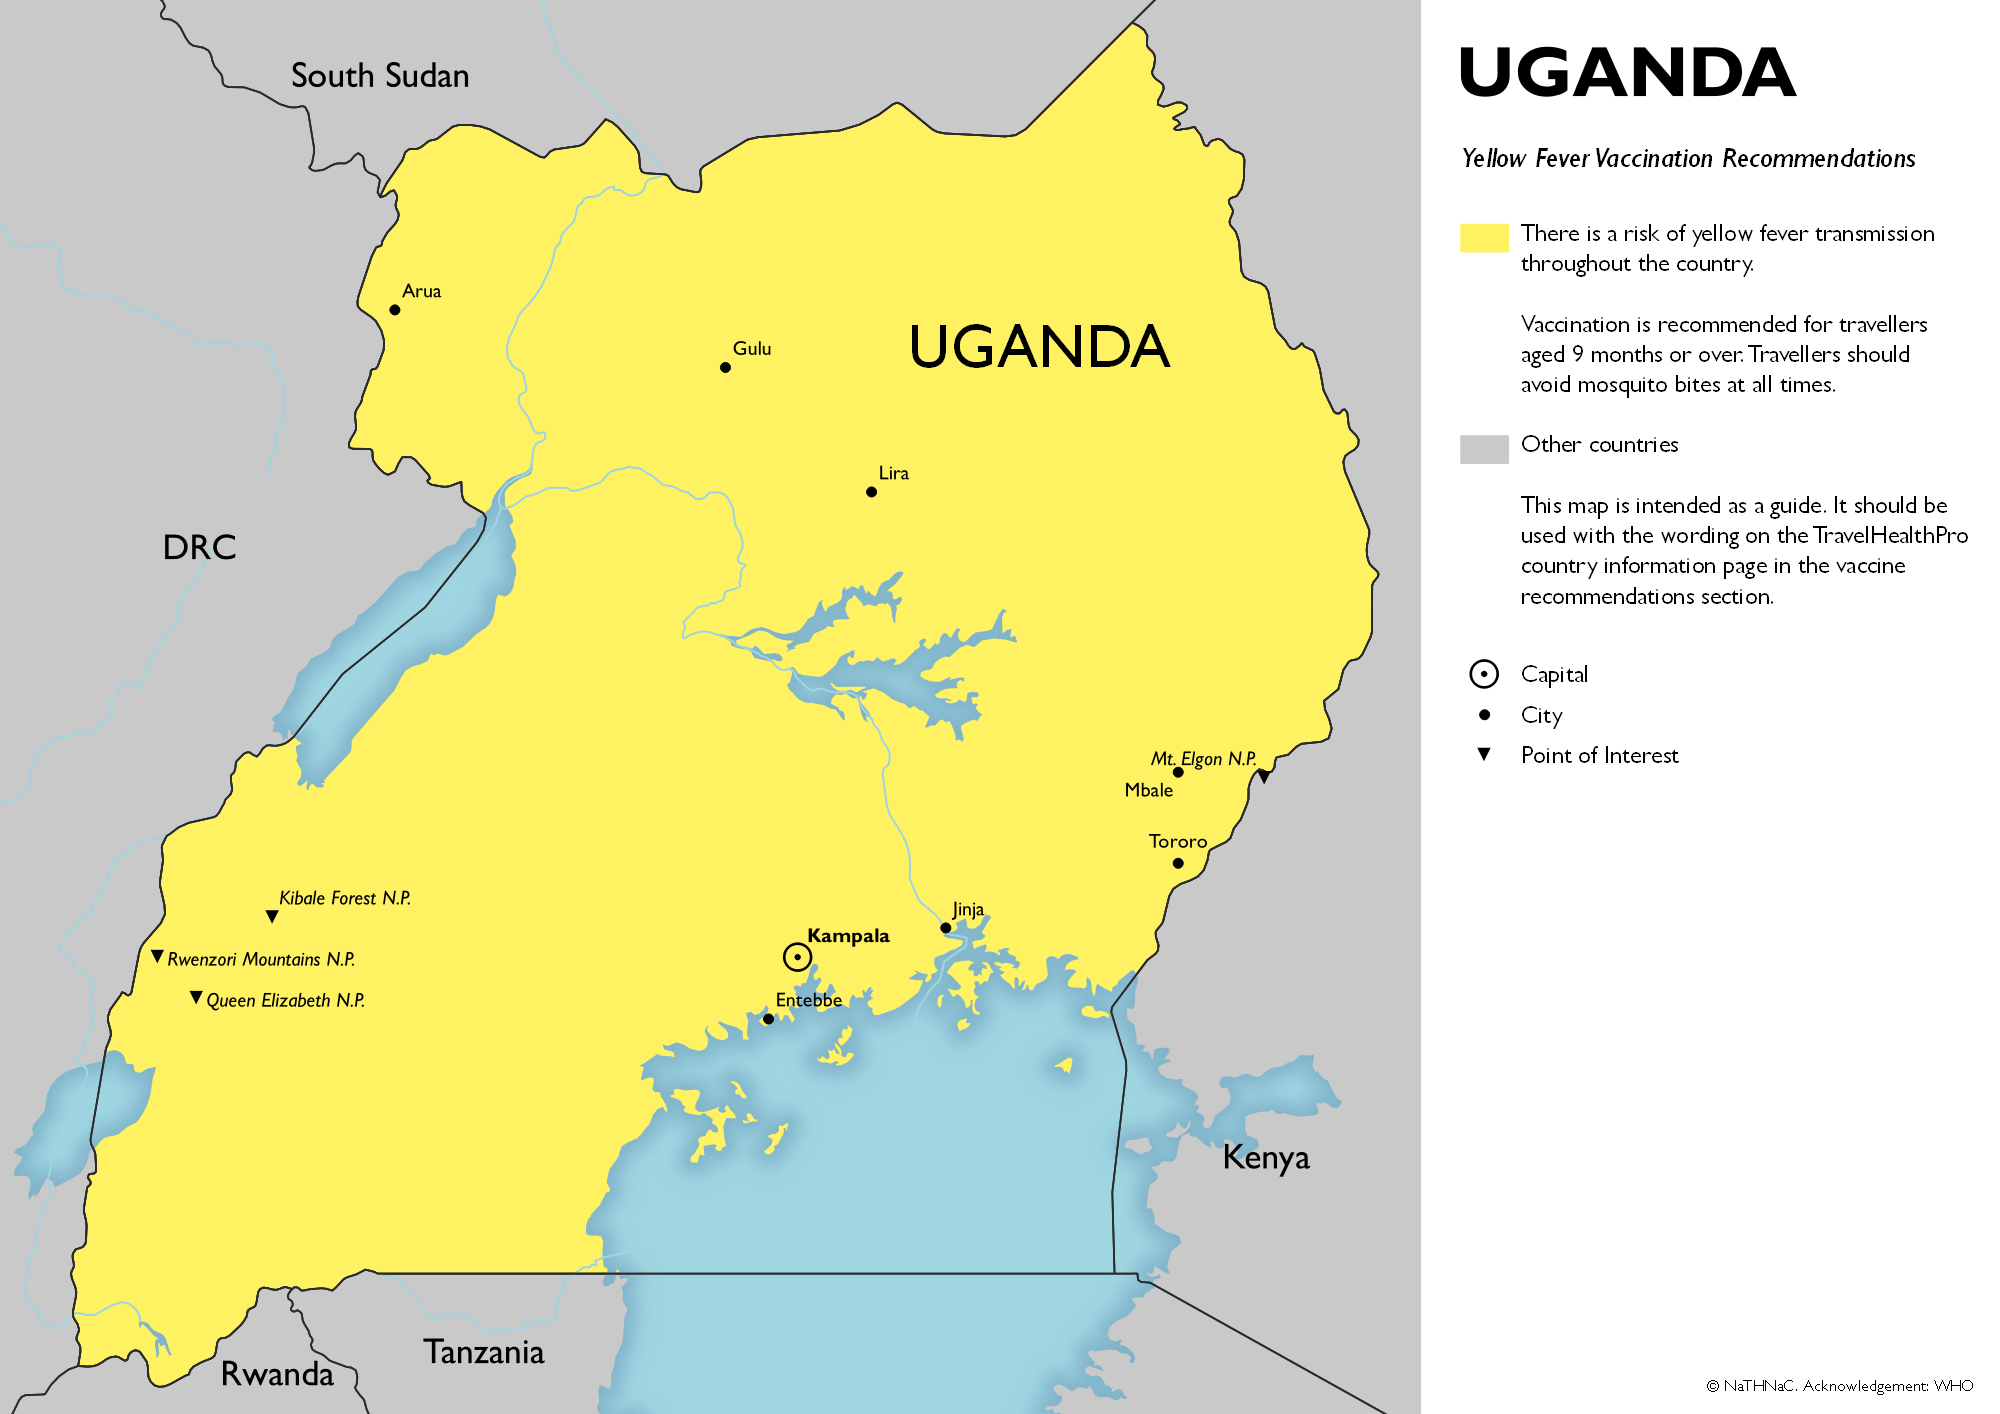 Yellow fever vaccine recommendation map for Uganda